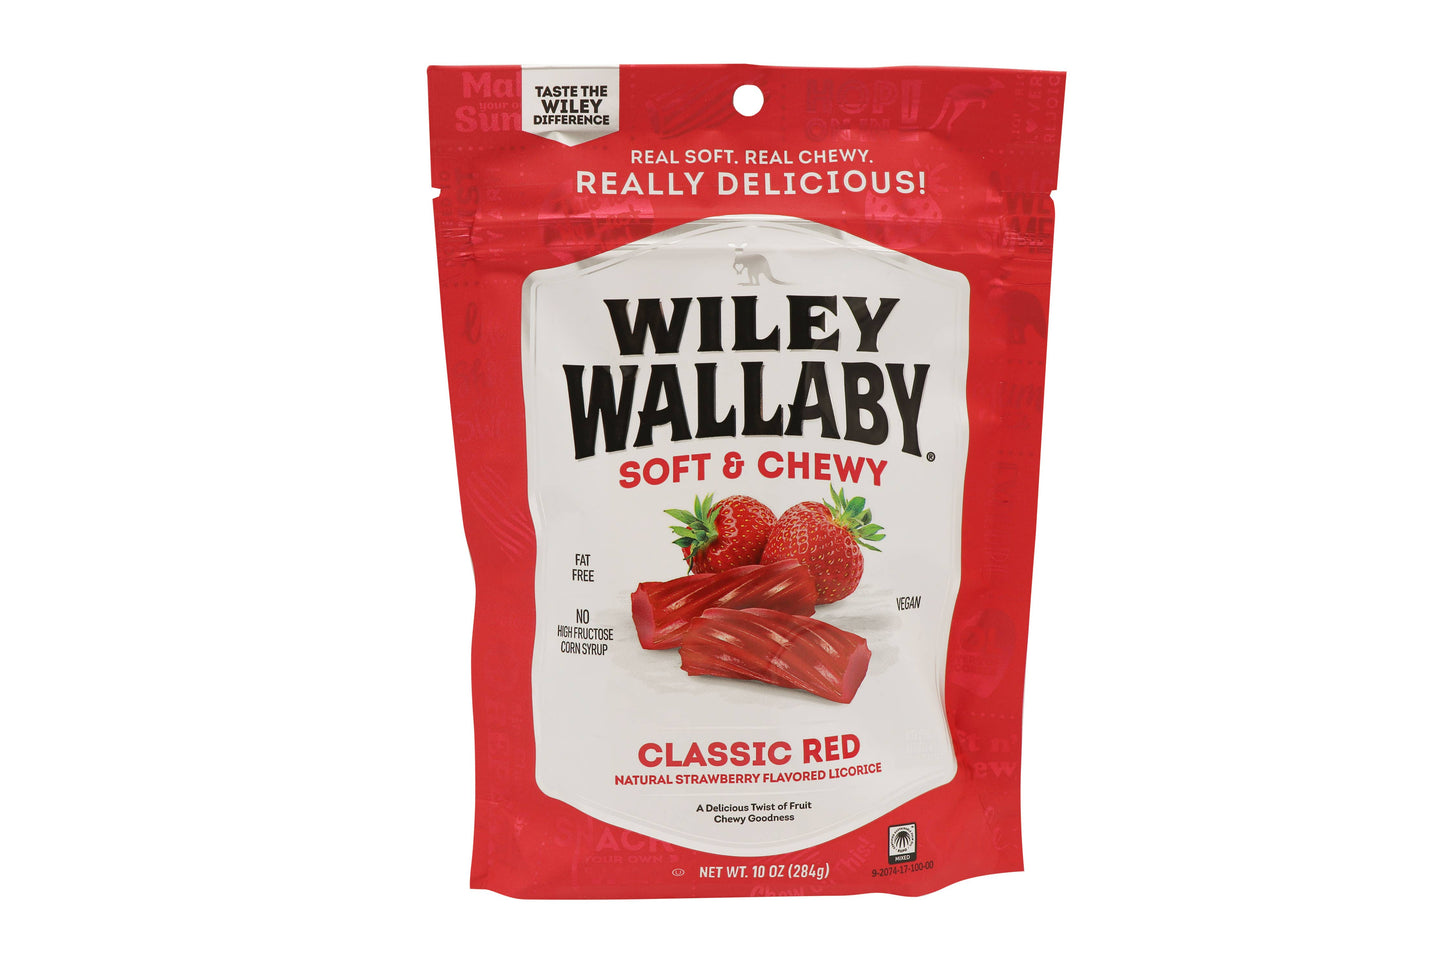 Wiley Wallaby Classic Red Licorice, 10oz Bag, Soft & Chewy,